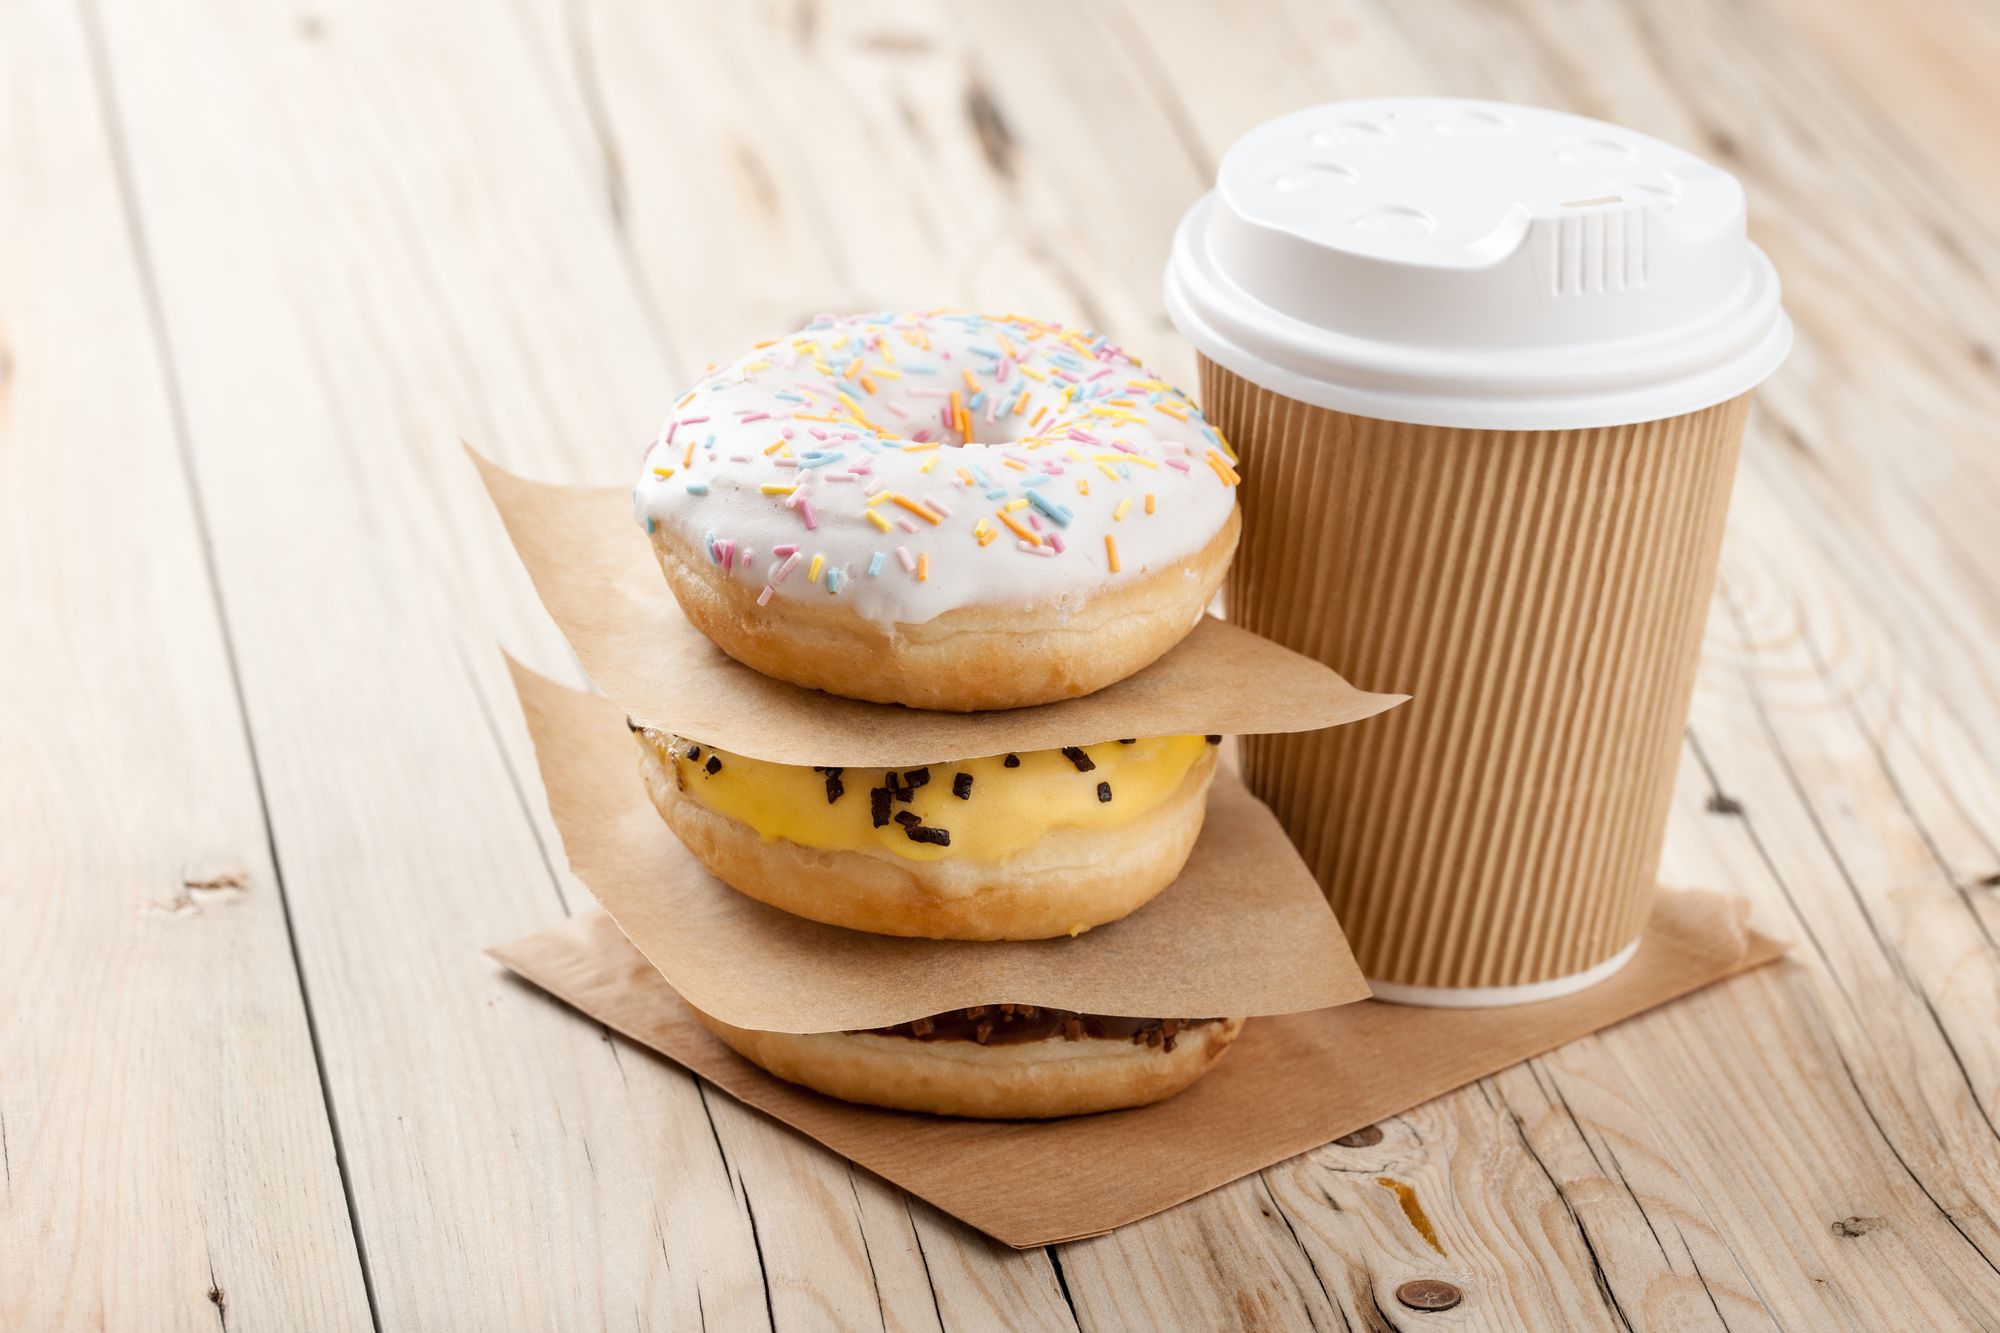 State AGs Investigate No Poaching Agreements by Dunkin' Donuts, Other Chains